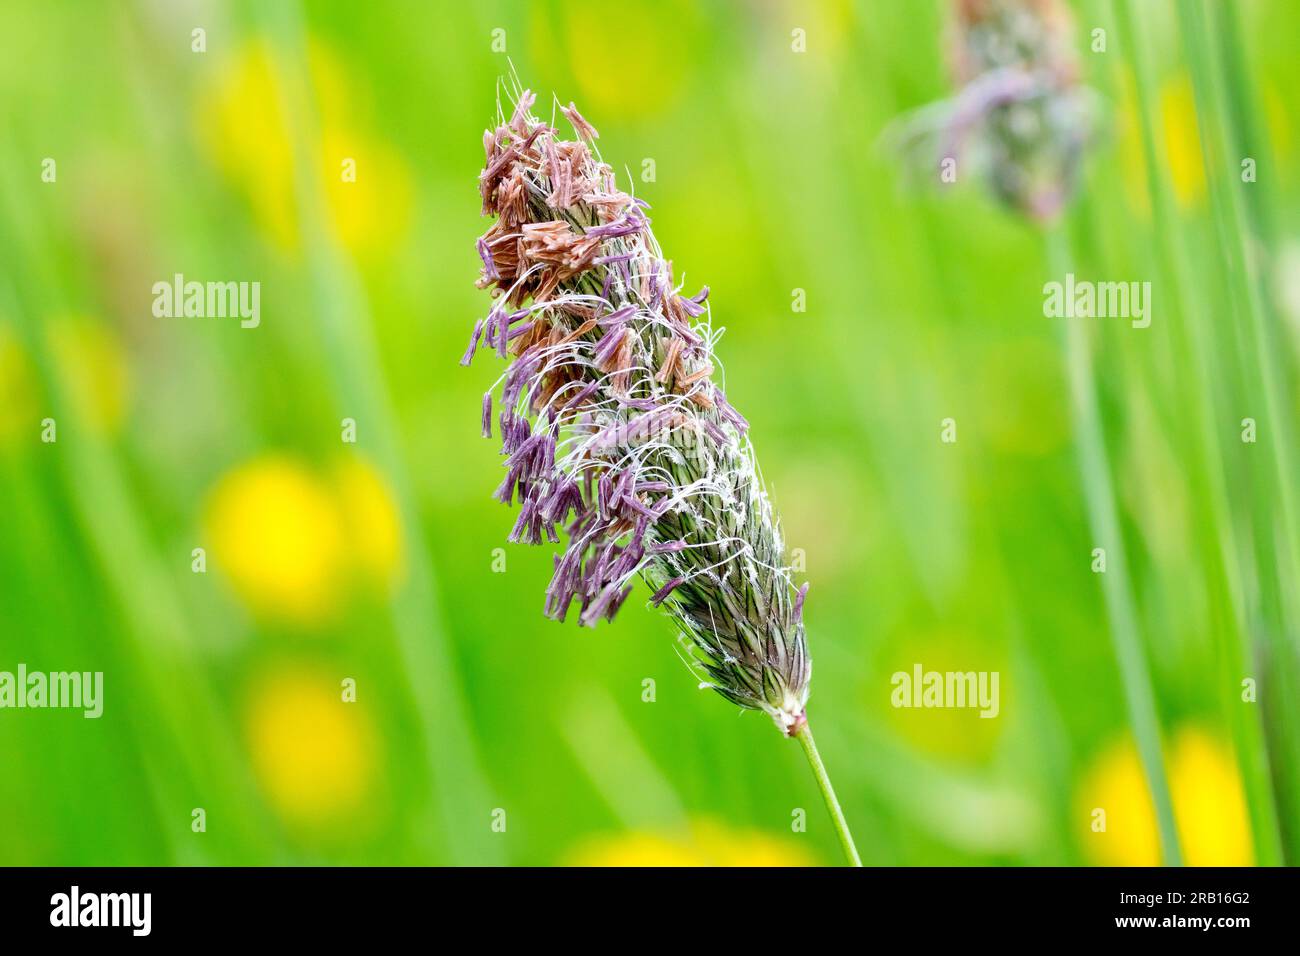 Meadow Foxtail (alopecurus pratensis), close up showing a single flowerhead of the common grass in flower in the spring, isolated. Stock Photo